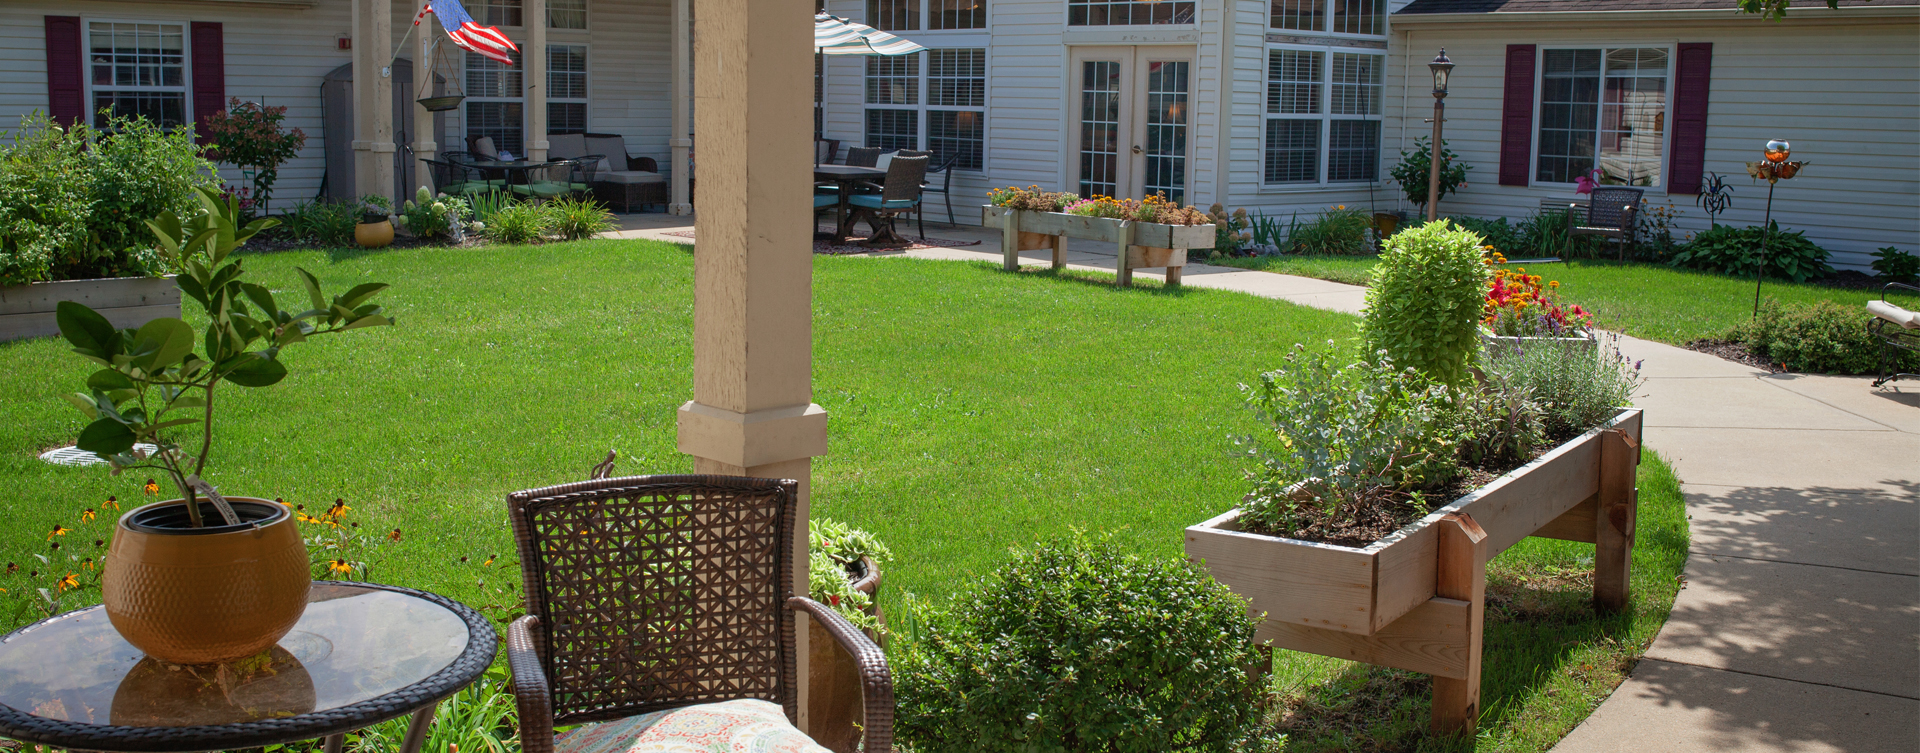 Enjoy bird watching, gardening and barbecuing in our courtyard at Bickford of Marion